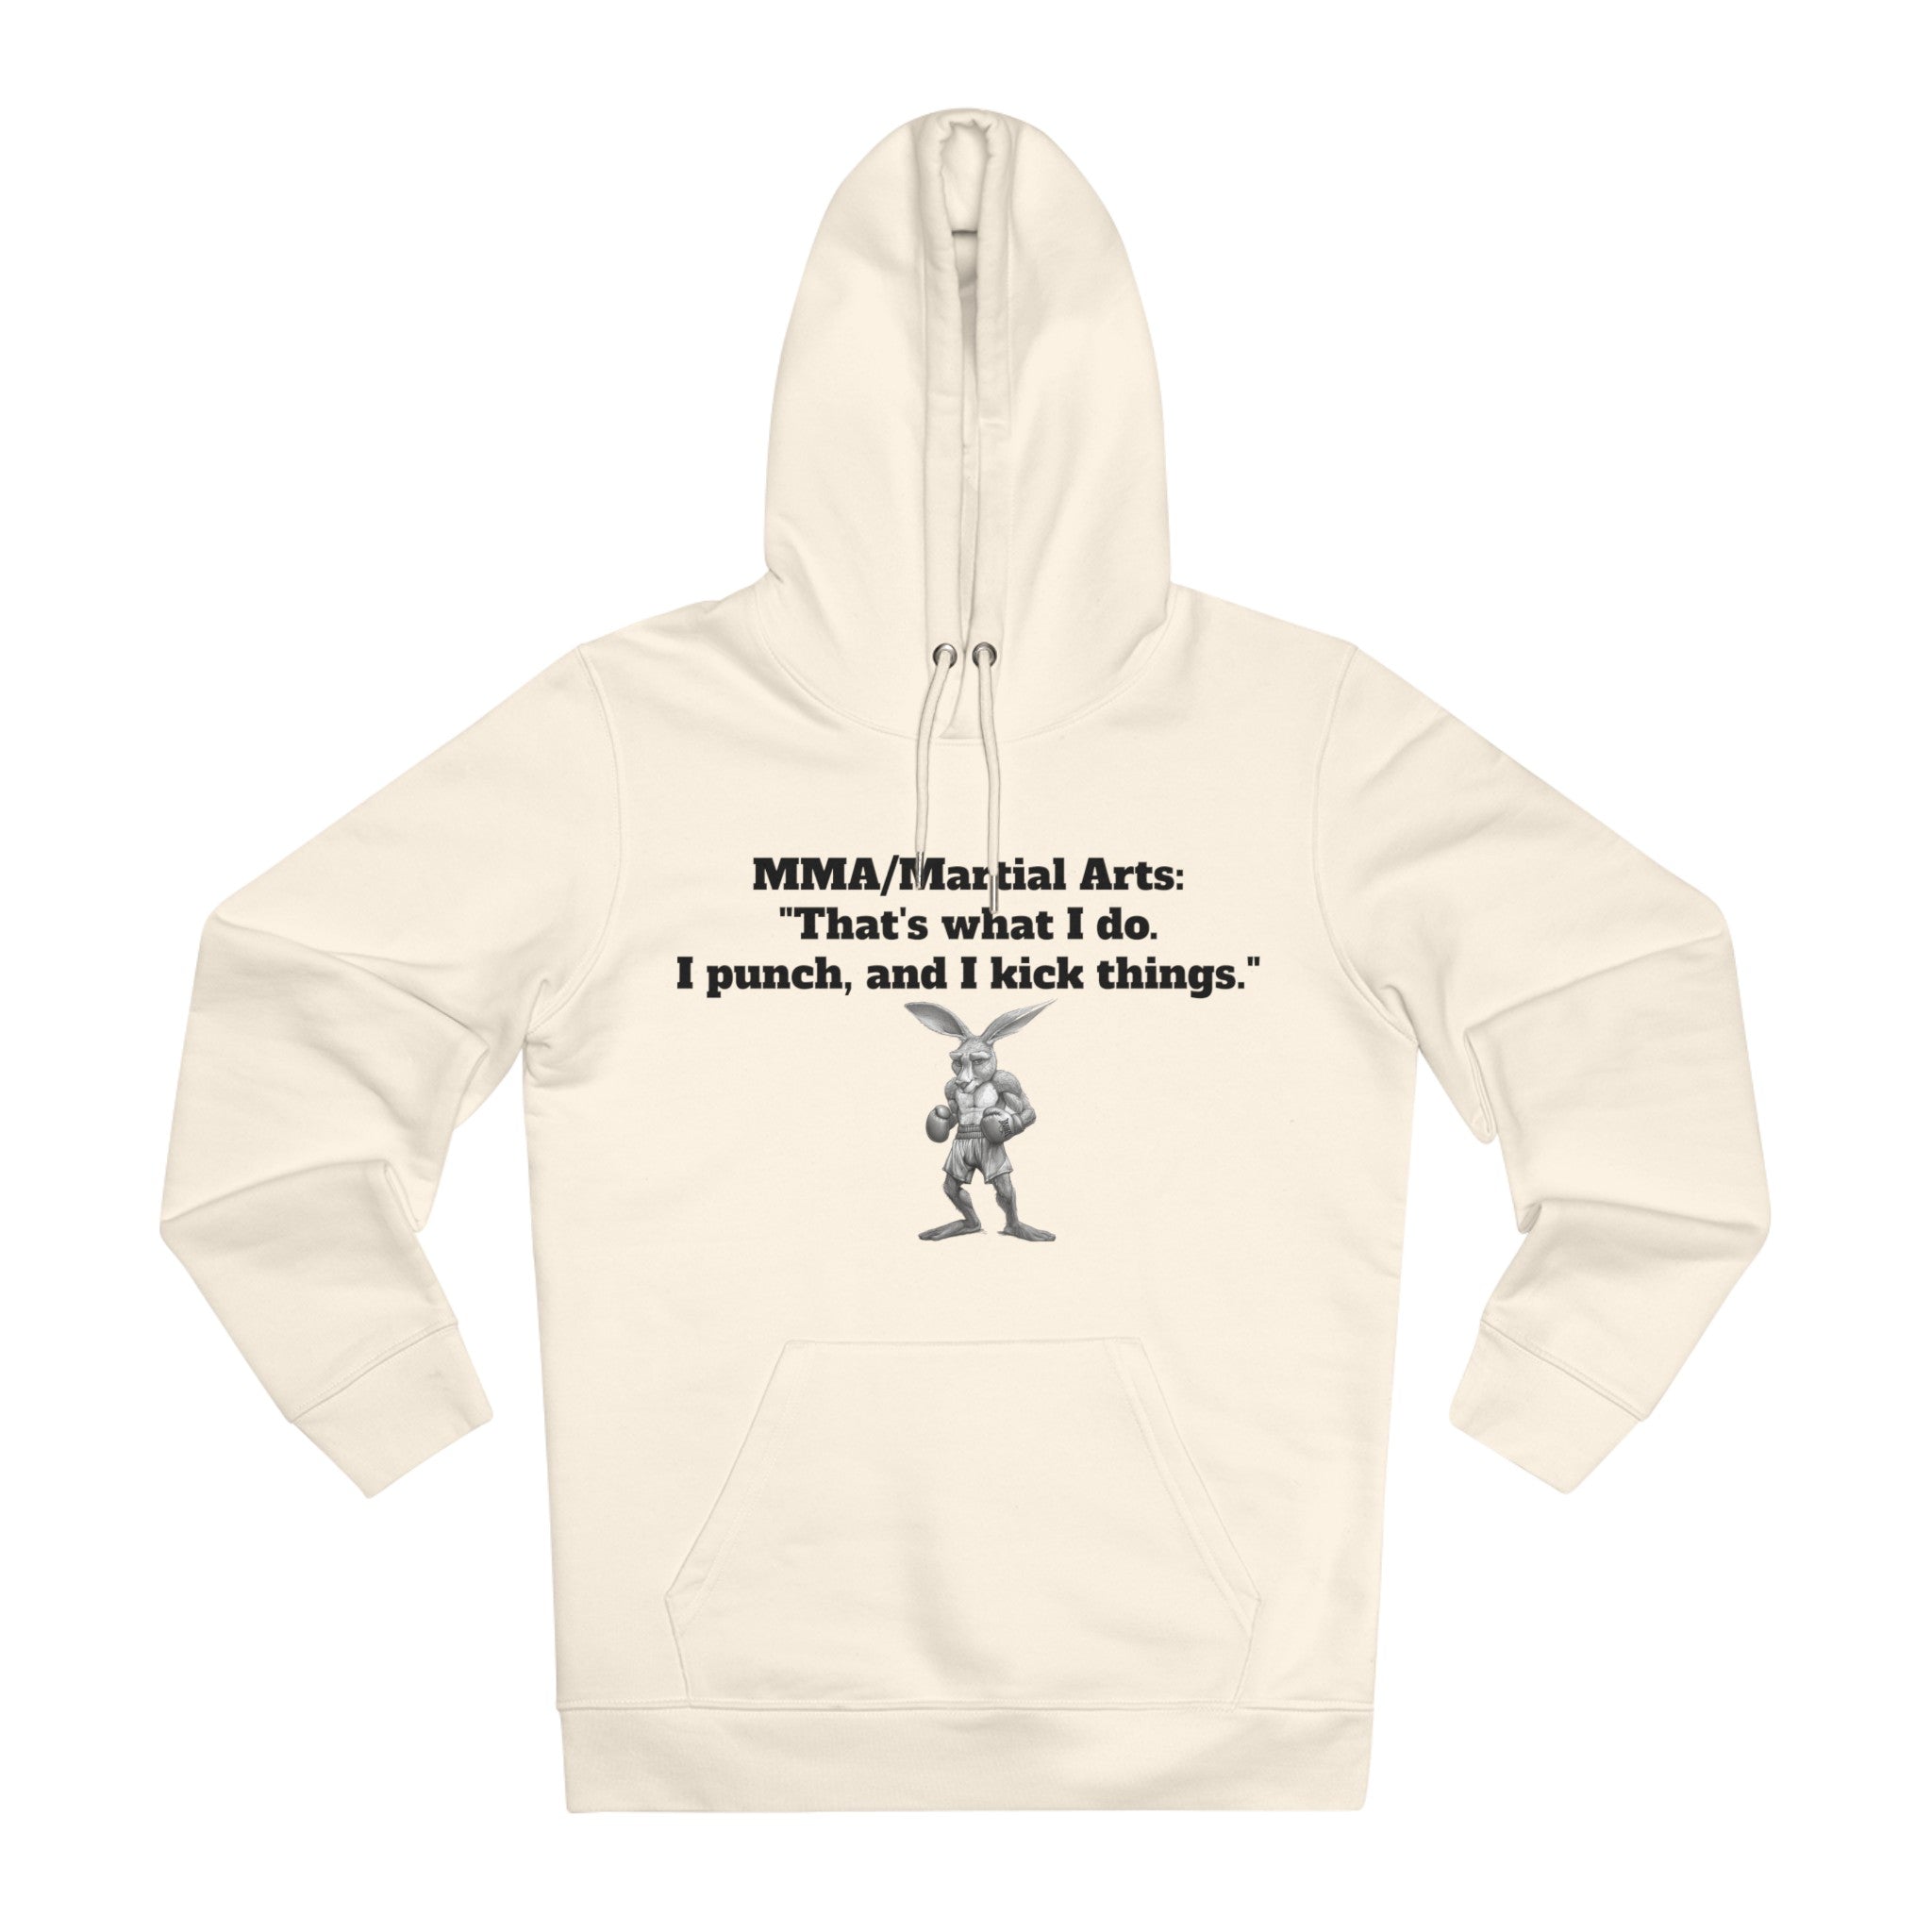 Fighter’s Creed: 'That's What I Do. I Punch, and I Kick Things.' Kangaroo Boxer Pose Unisex Cruiser Hoodie